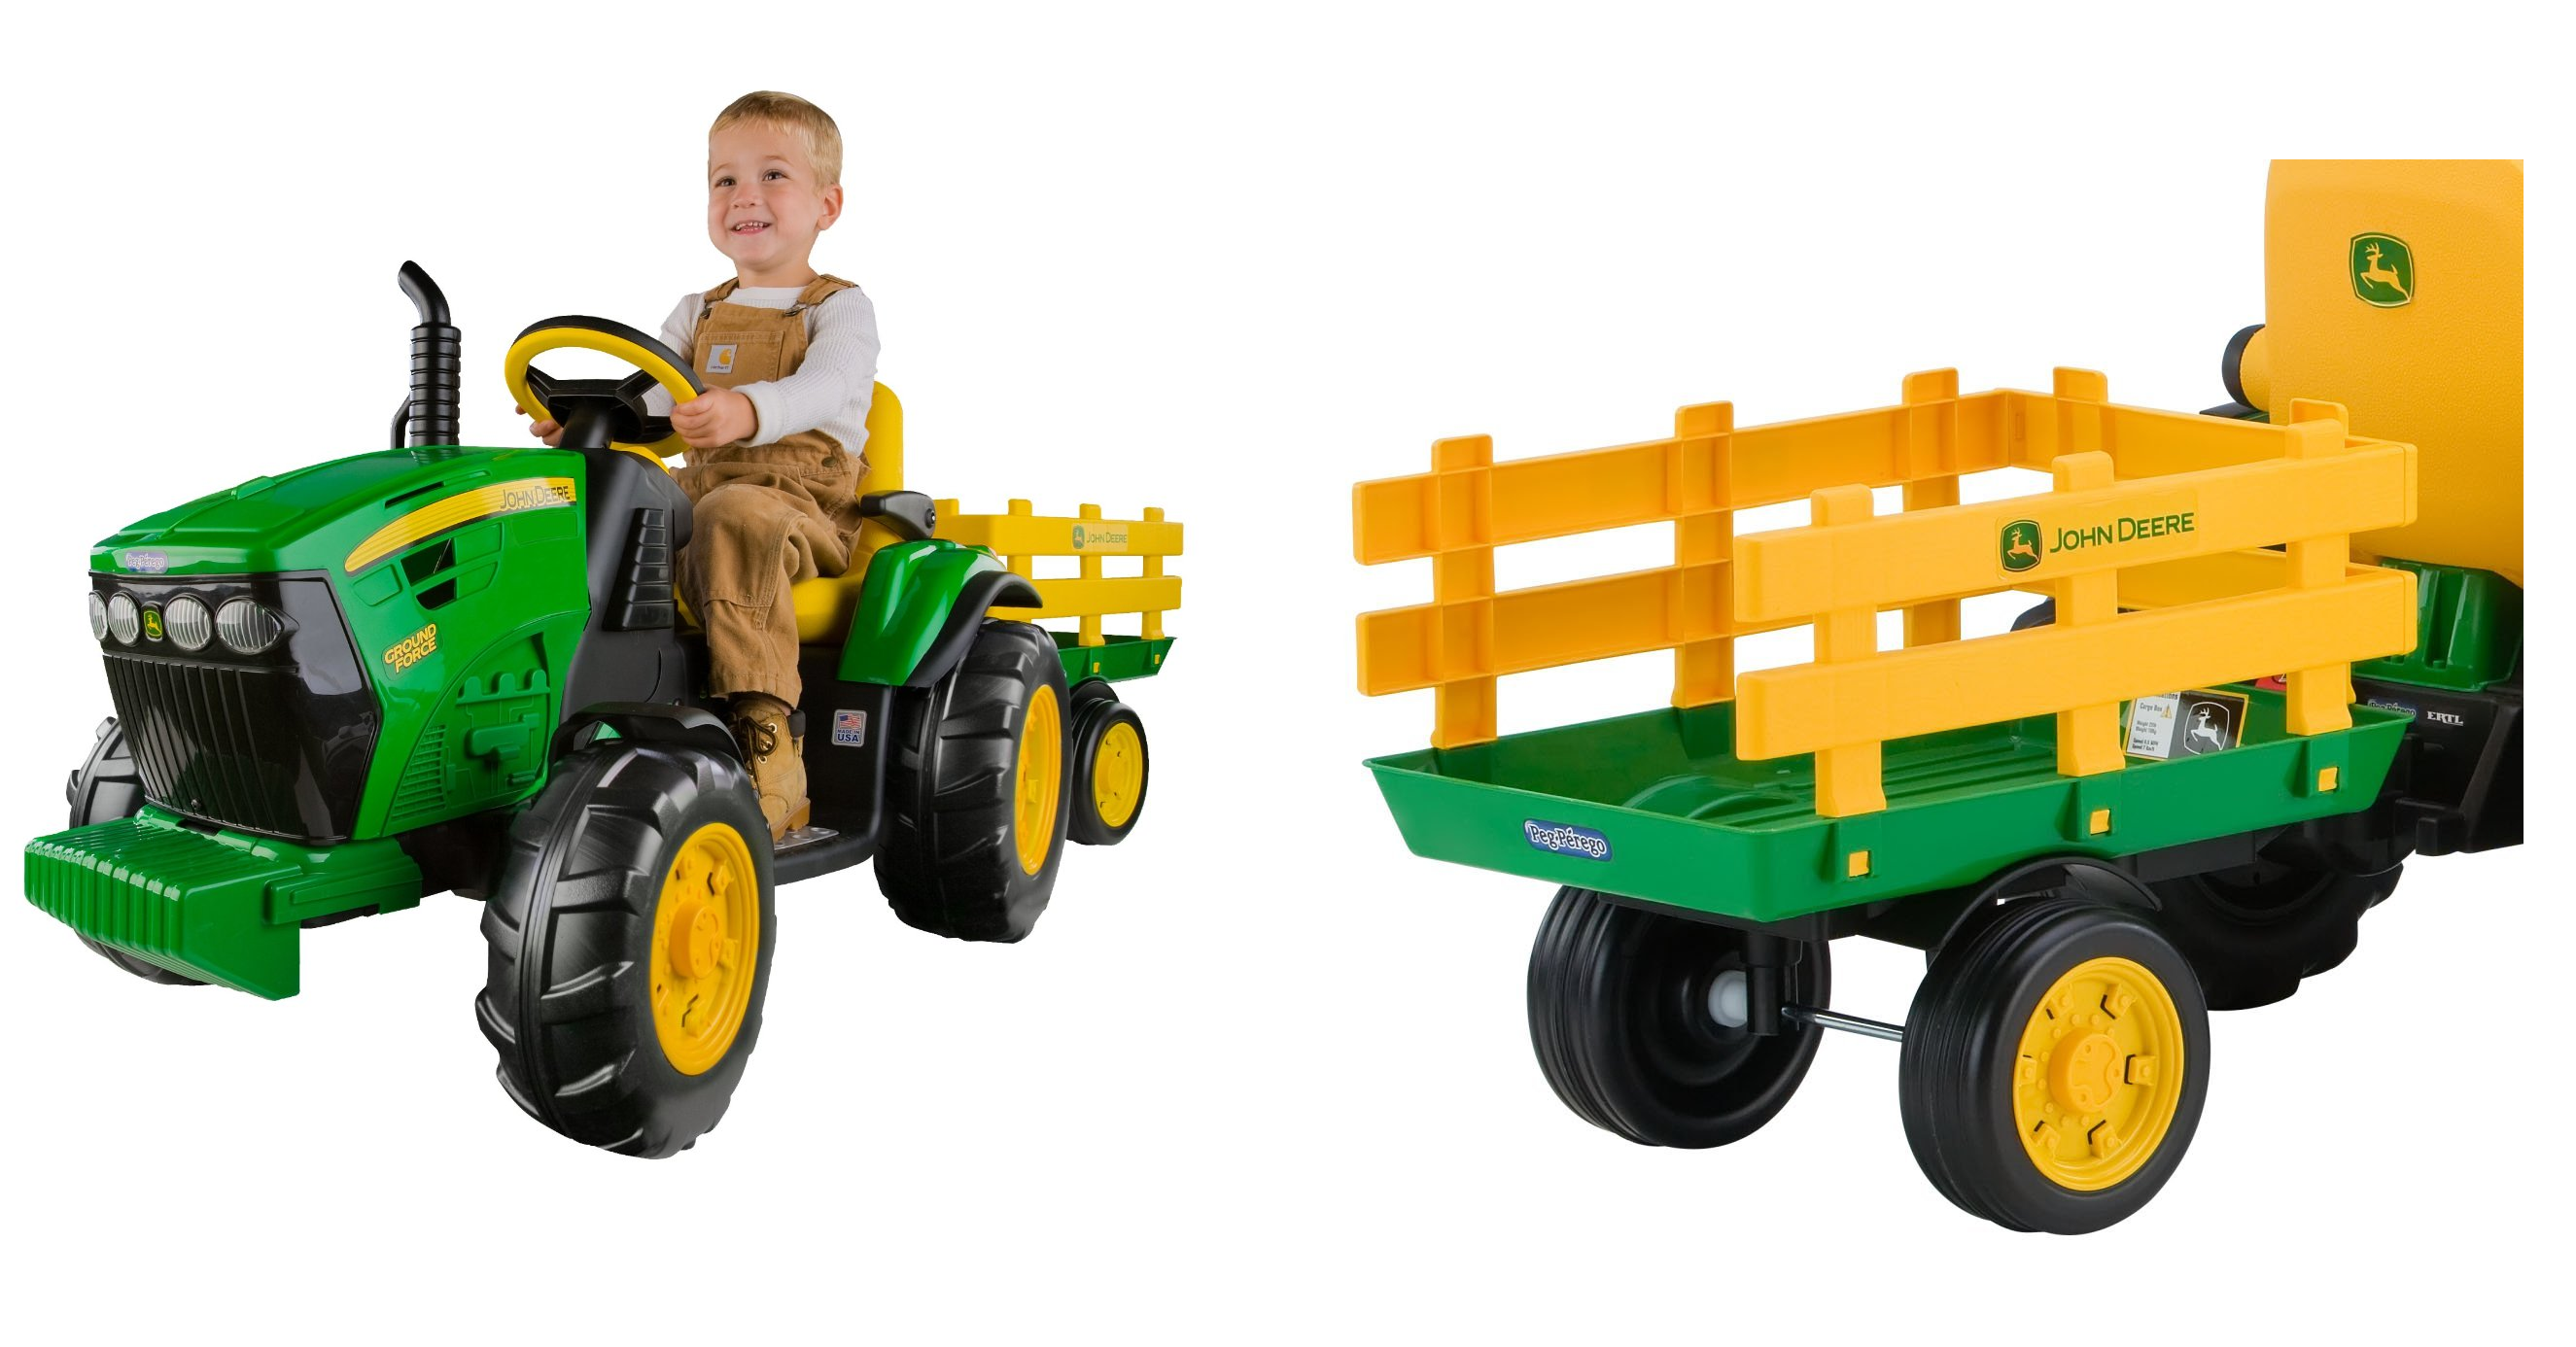 Save Over $100 on The Peg Perego John Deere Ground Force Tractor with Trailer on Amazon!